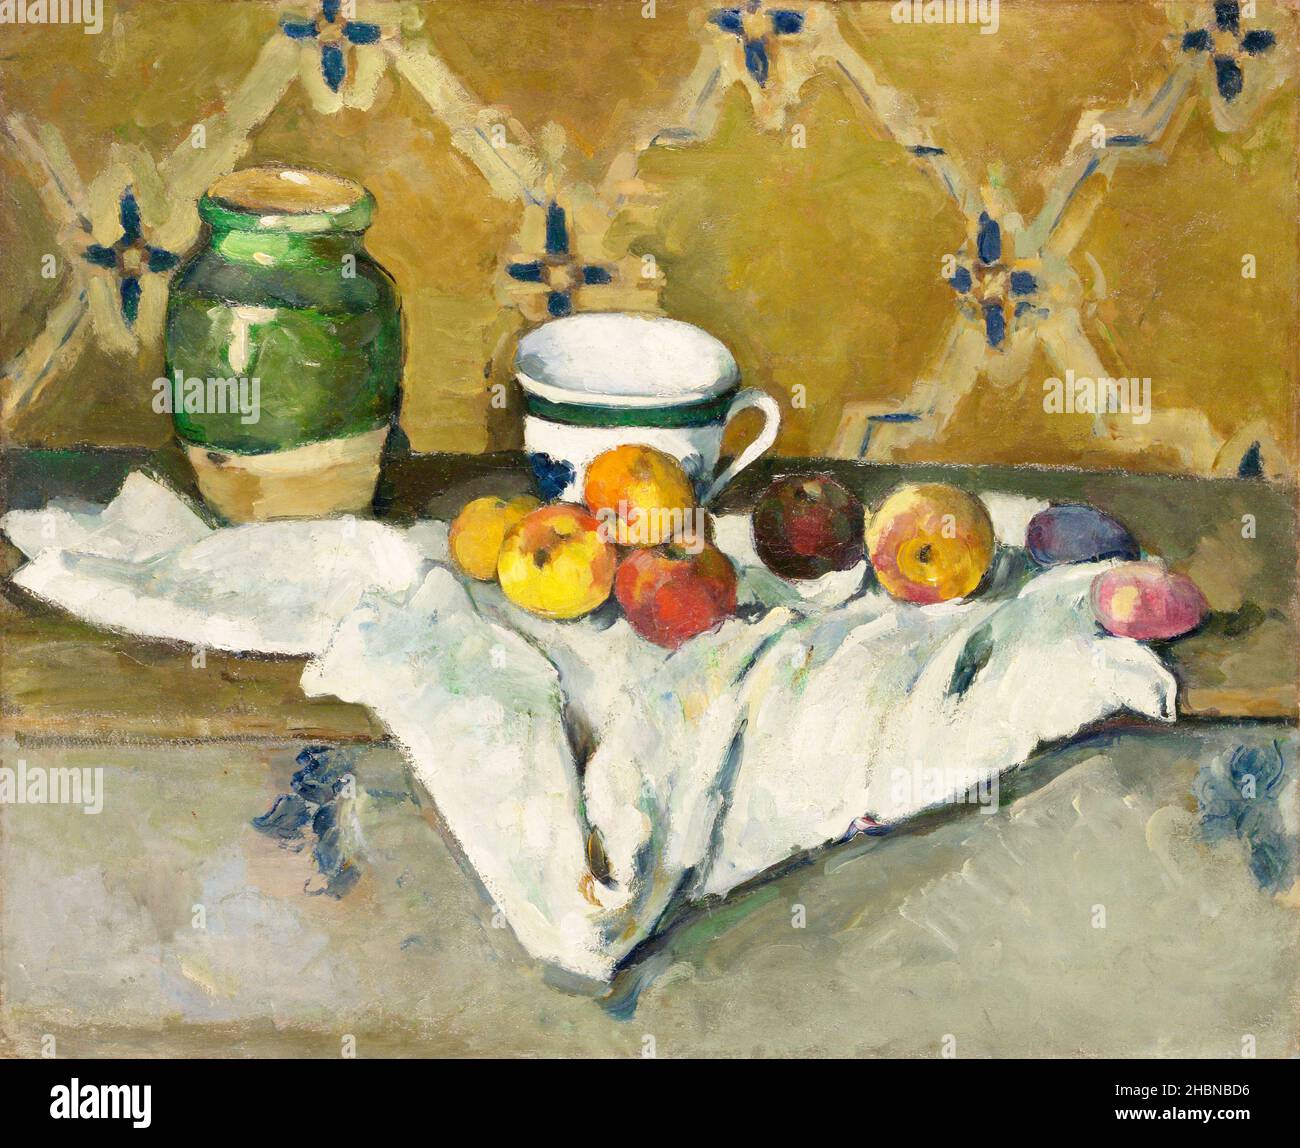 Still Life with Jar, Cup, and Apples (ca. 1877) by Paul Cézanne. Stock Photo